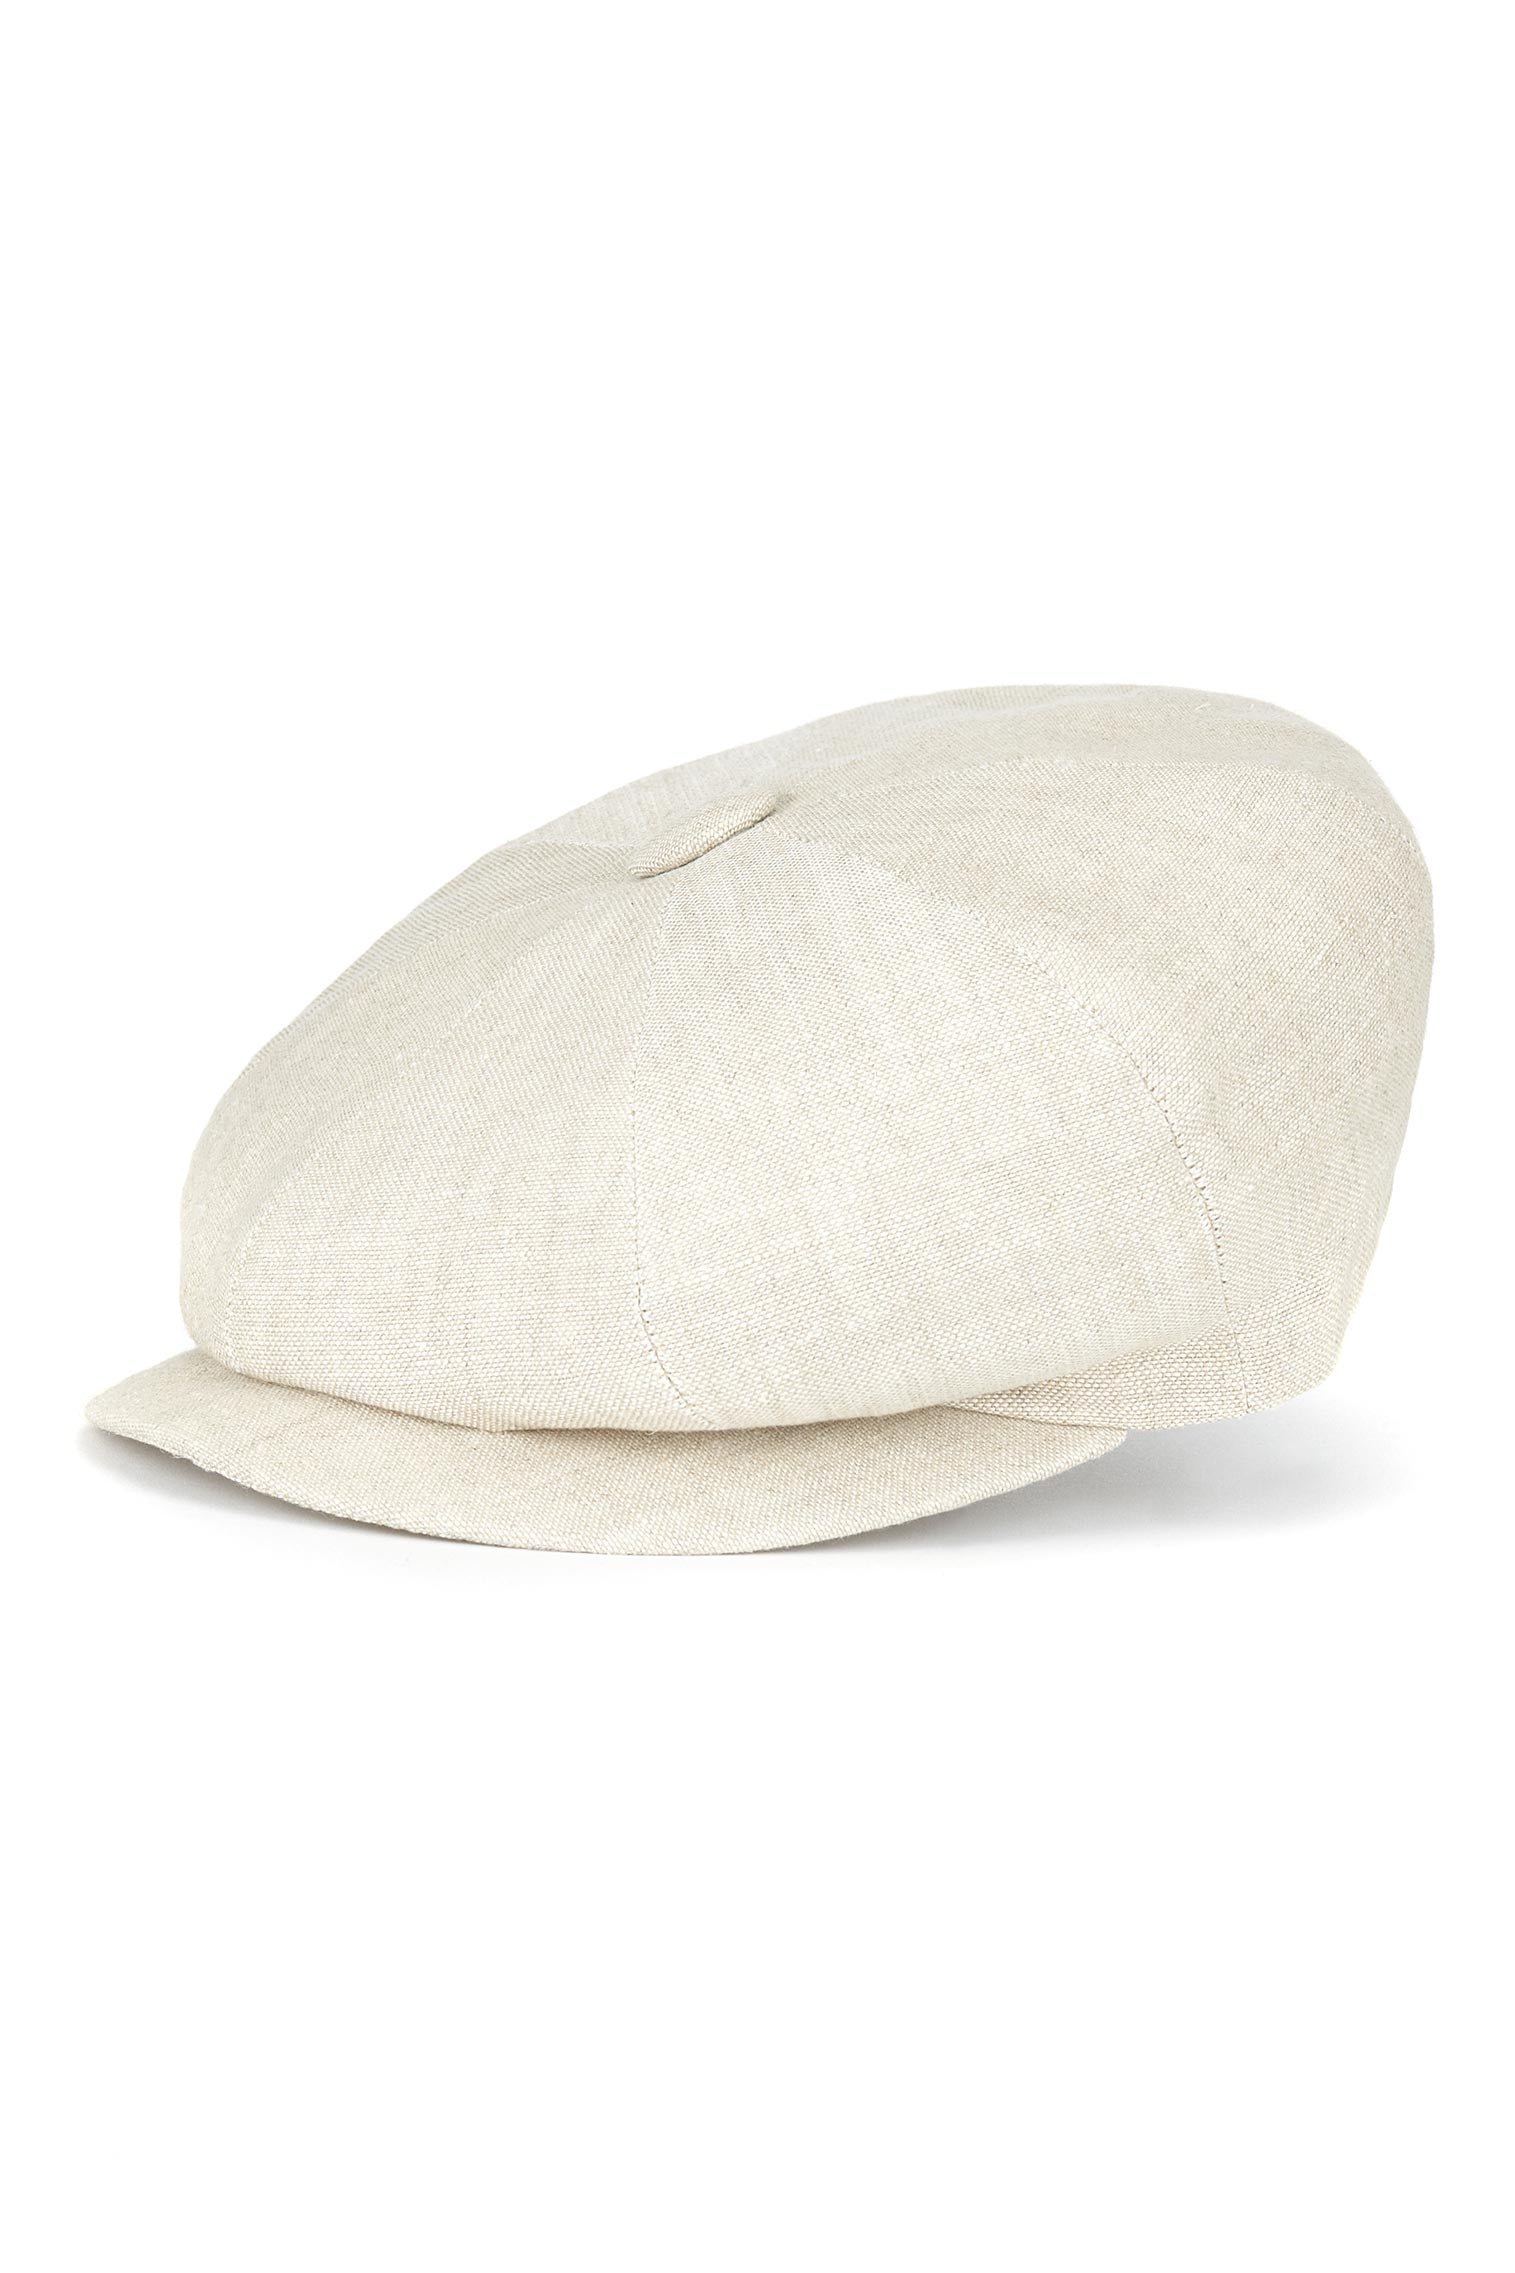 Linen Muirfield Bakerboy Cap - Father's Day Gift Guide - Lock & Co. Hatters London UK